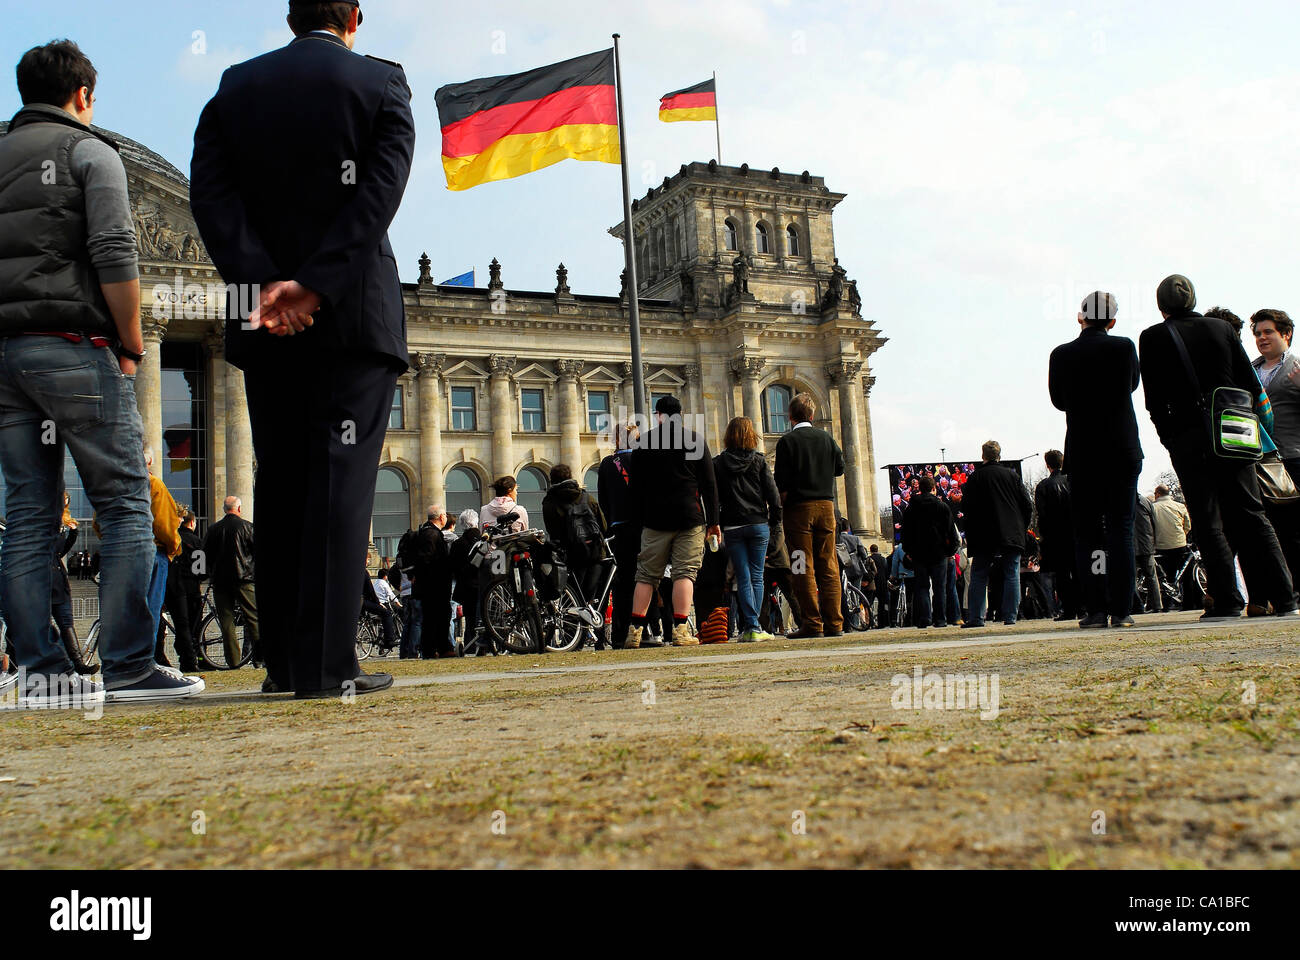 Scenery of a public viewing at the German Reichstag in Berlin, during the election to the new Federal President. It was a sunny Sunday and about 500 People were watching the broadcasting transmission of the election on the field in front of the German Reichstag. Berlin 18th March, 2012. Stock Photo